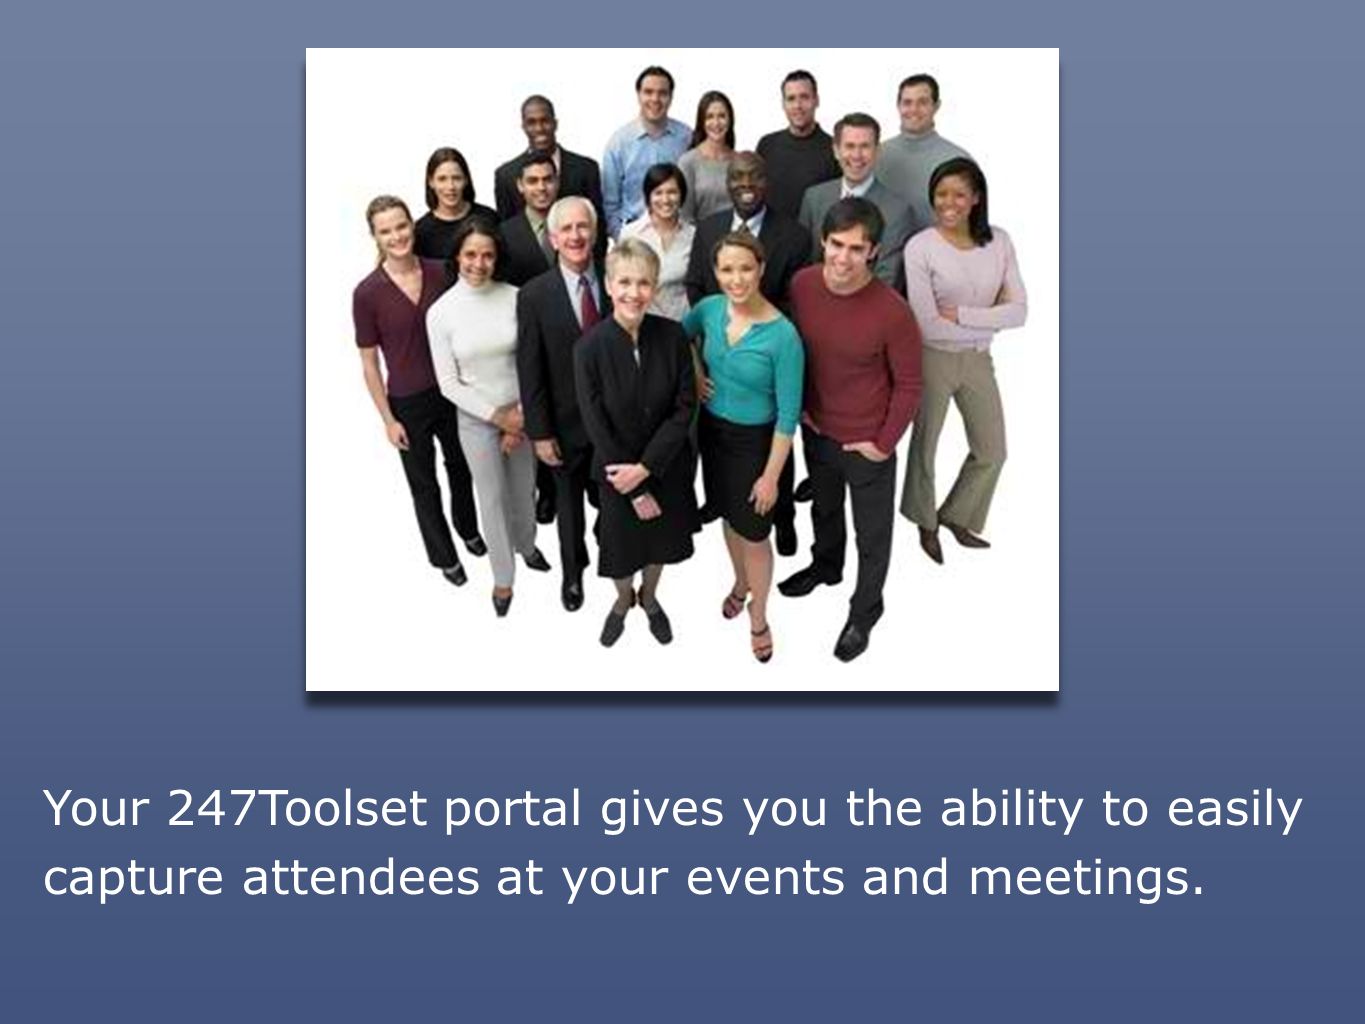 Your 247Toolset portal gives you the ability to easily capture attendees at your events and meetings.